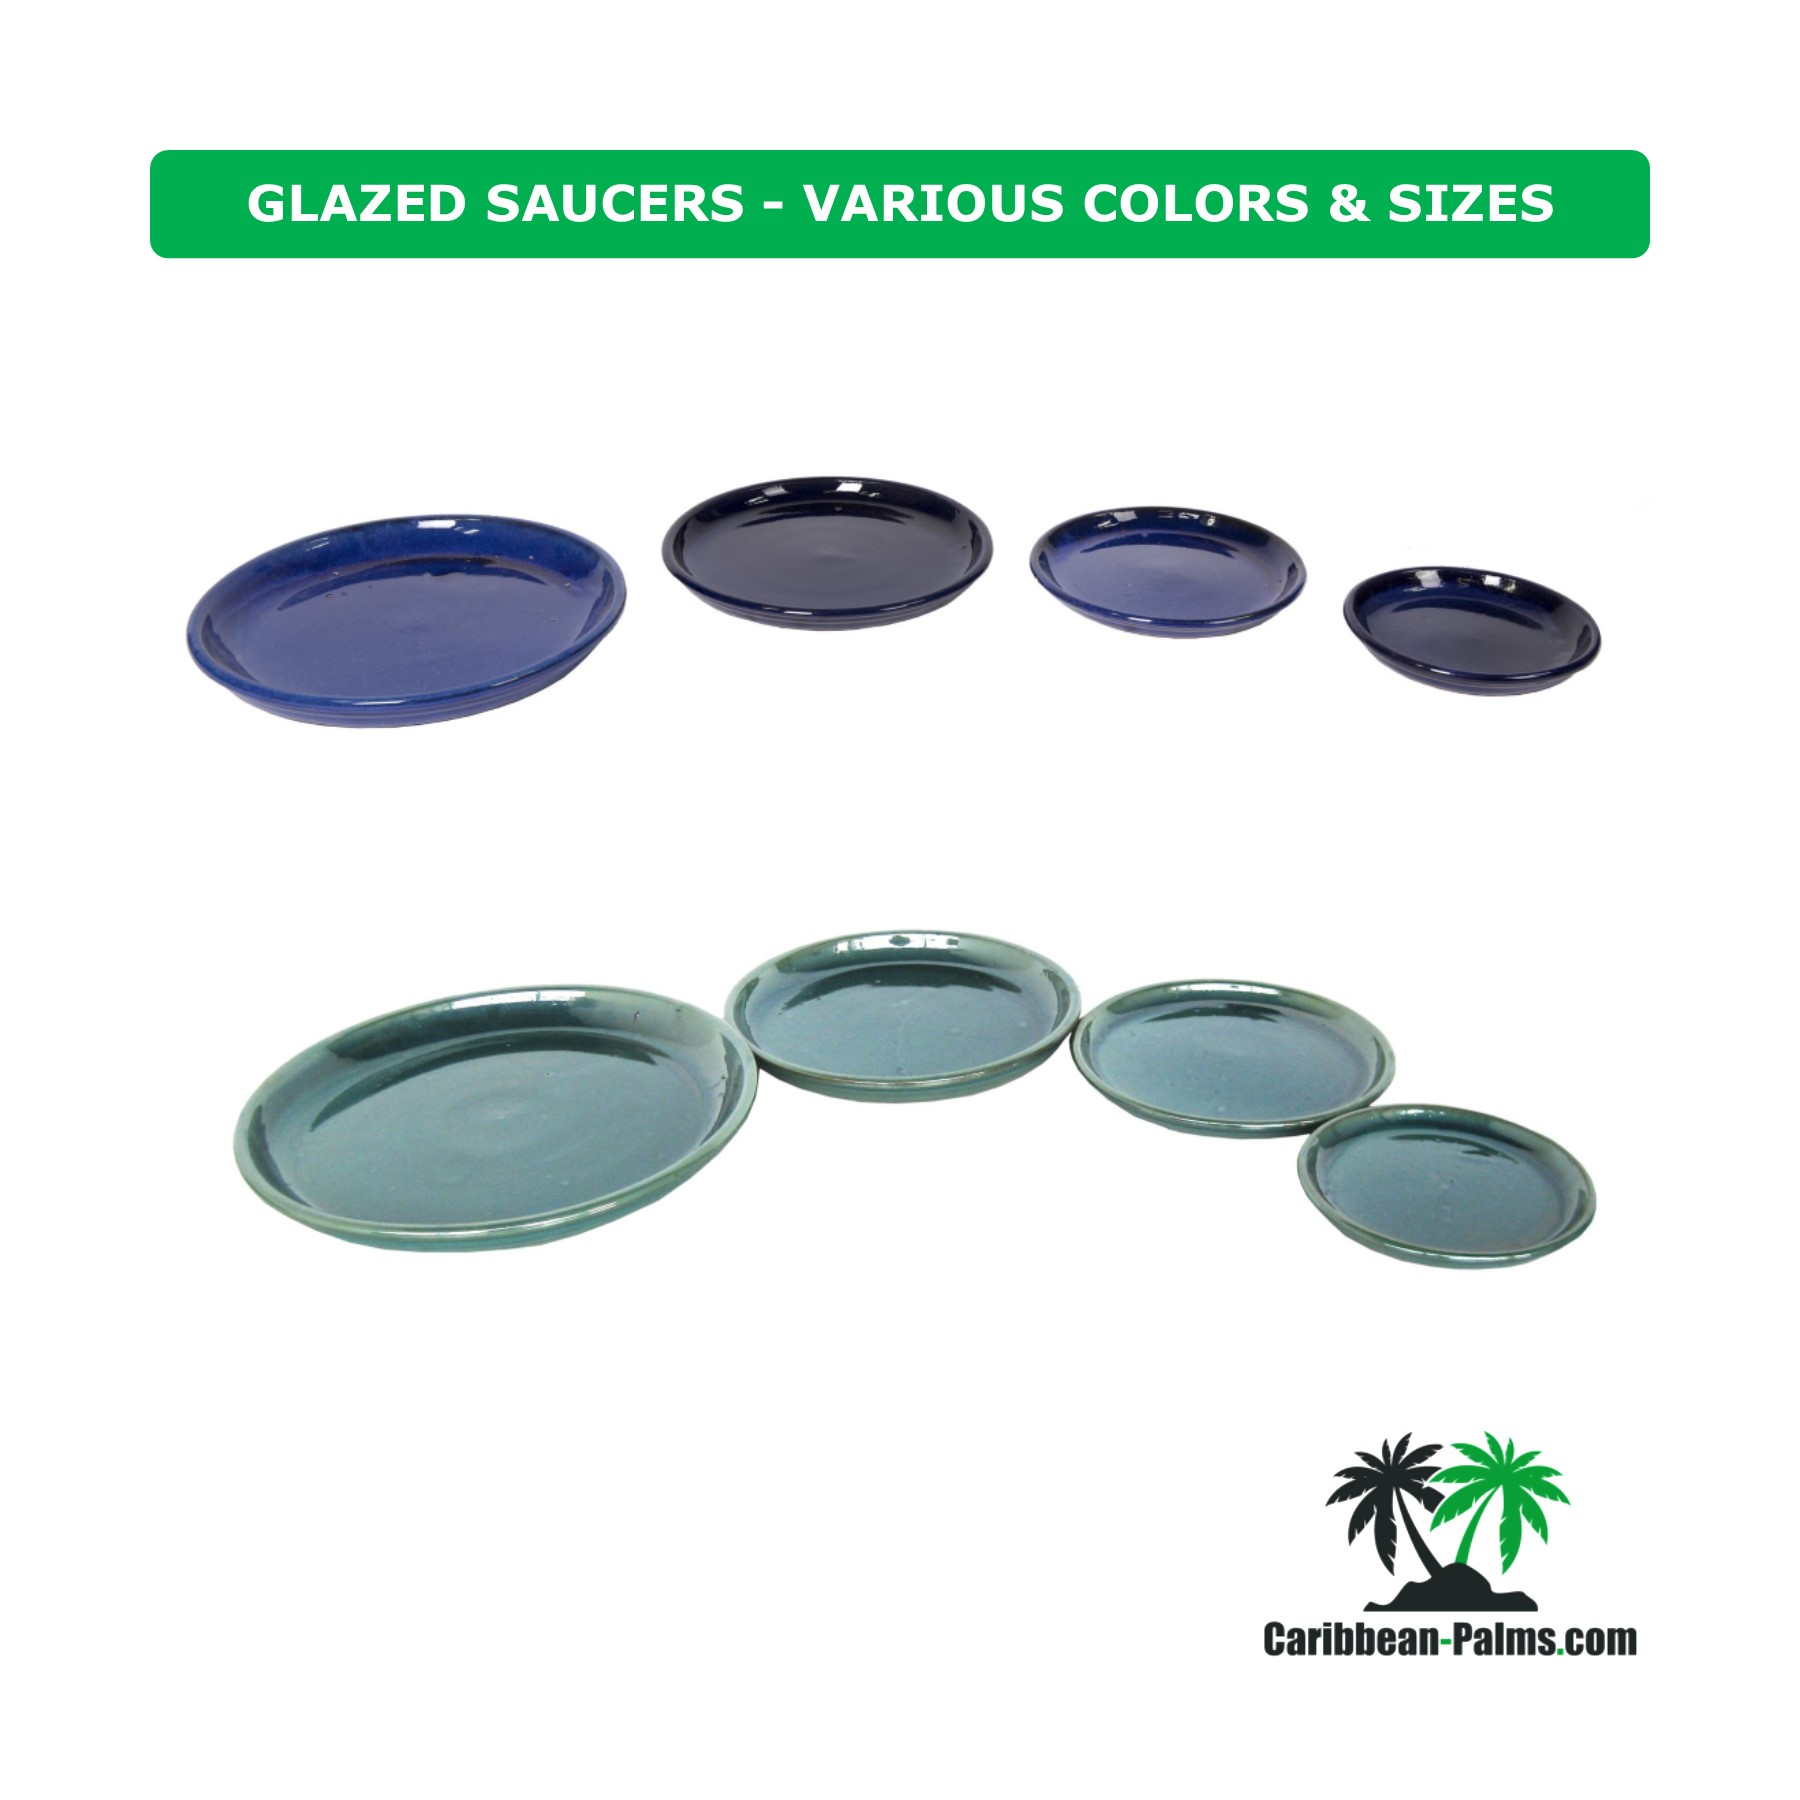 GLAZED SAUCERS VARIOUS COLORS SIZES